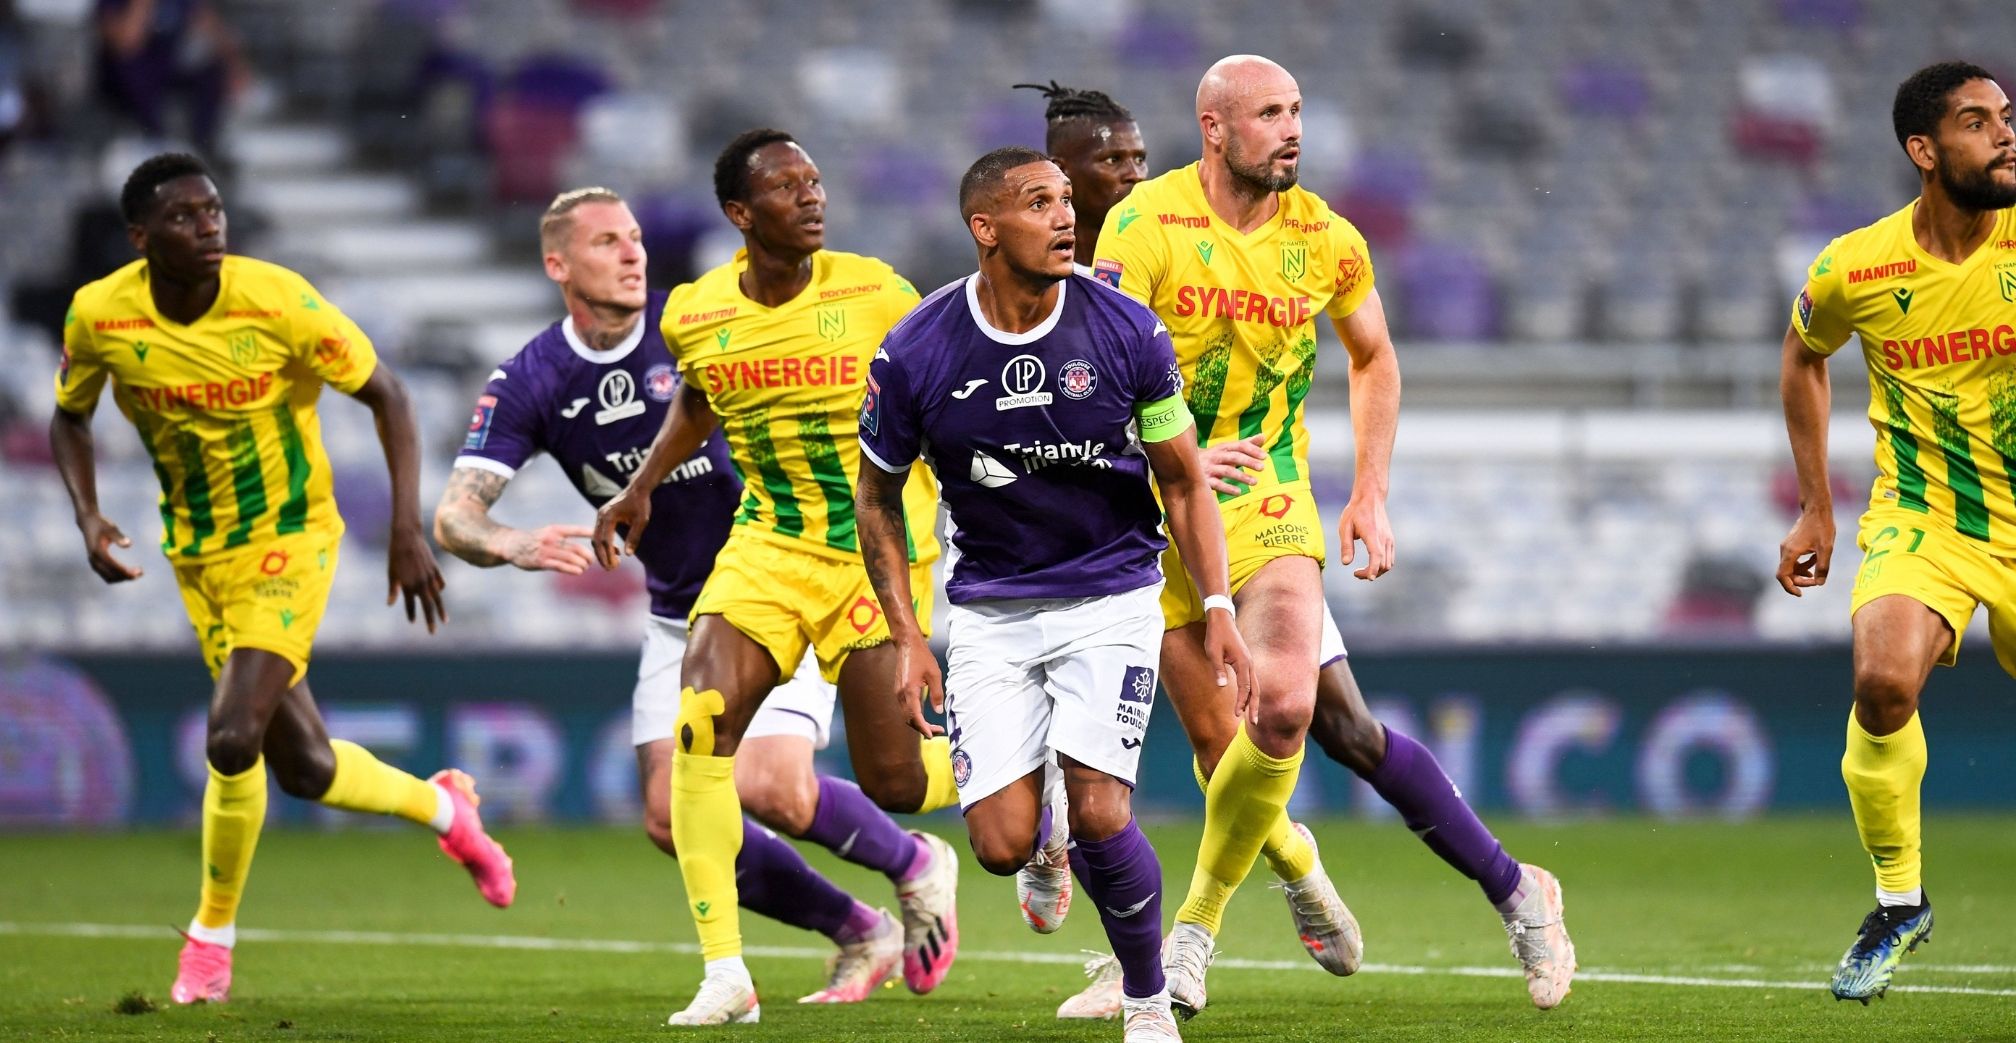 Nantes-Toulouse: For all the marbles